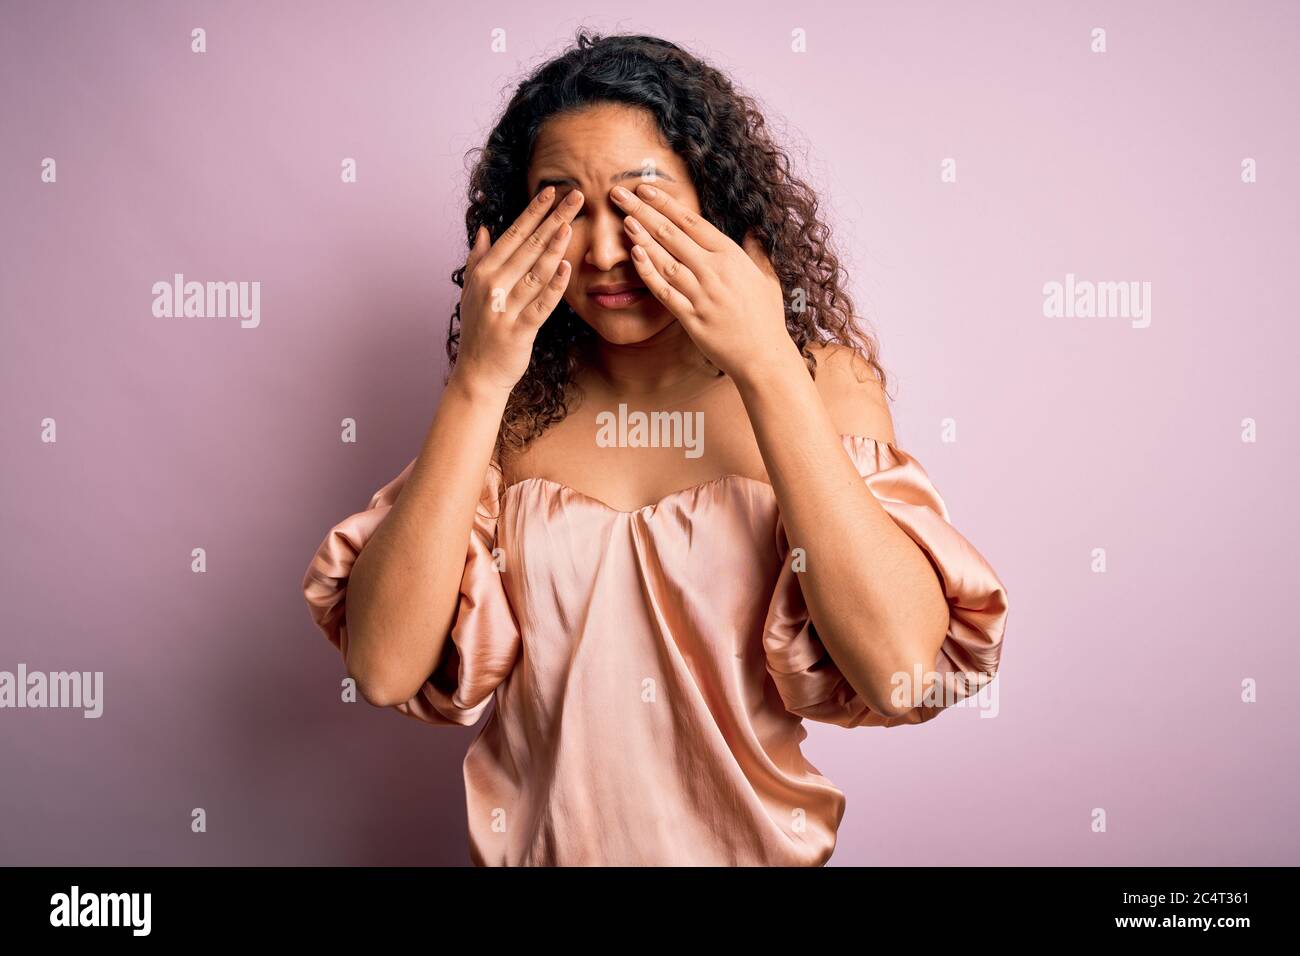 Young beautiful woman with curly hair wearing casual t-shirt standing over pink background rubbing eyes for fatigue and headache, sleepy and tired exp Stock Photo